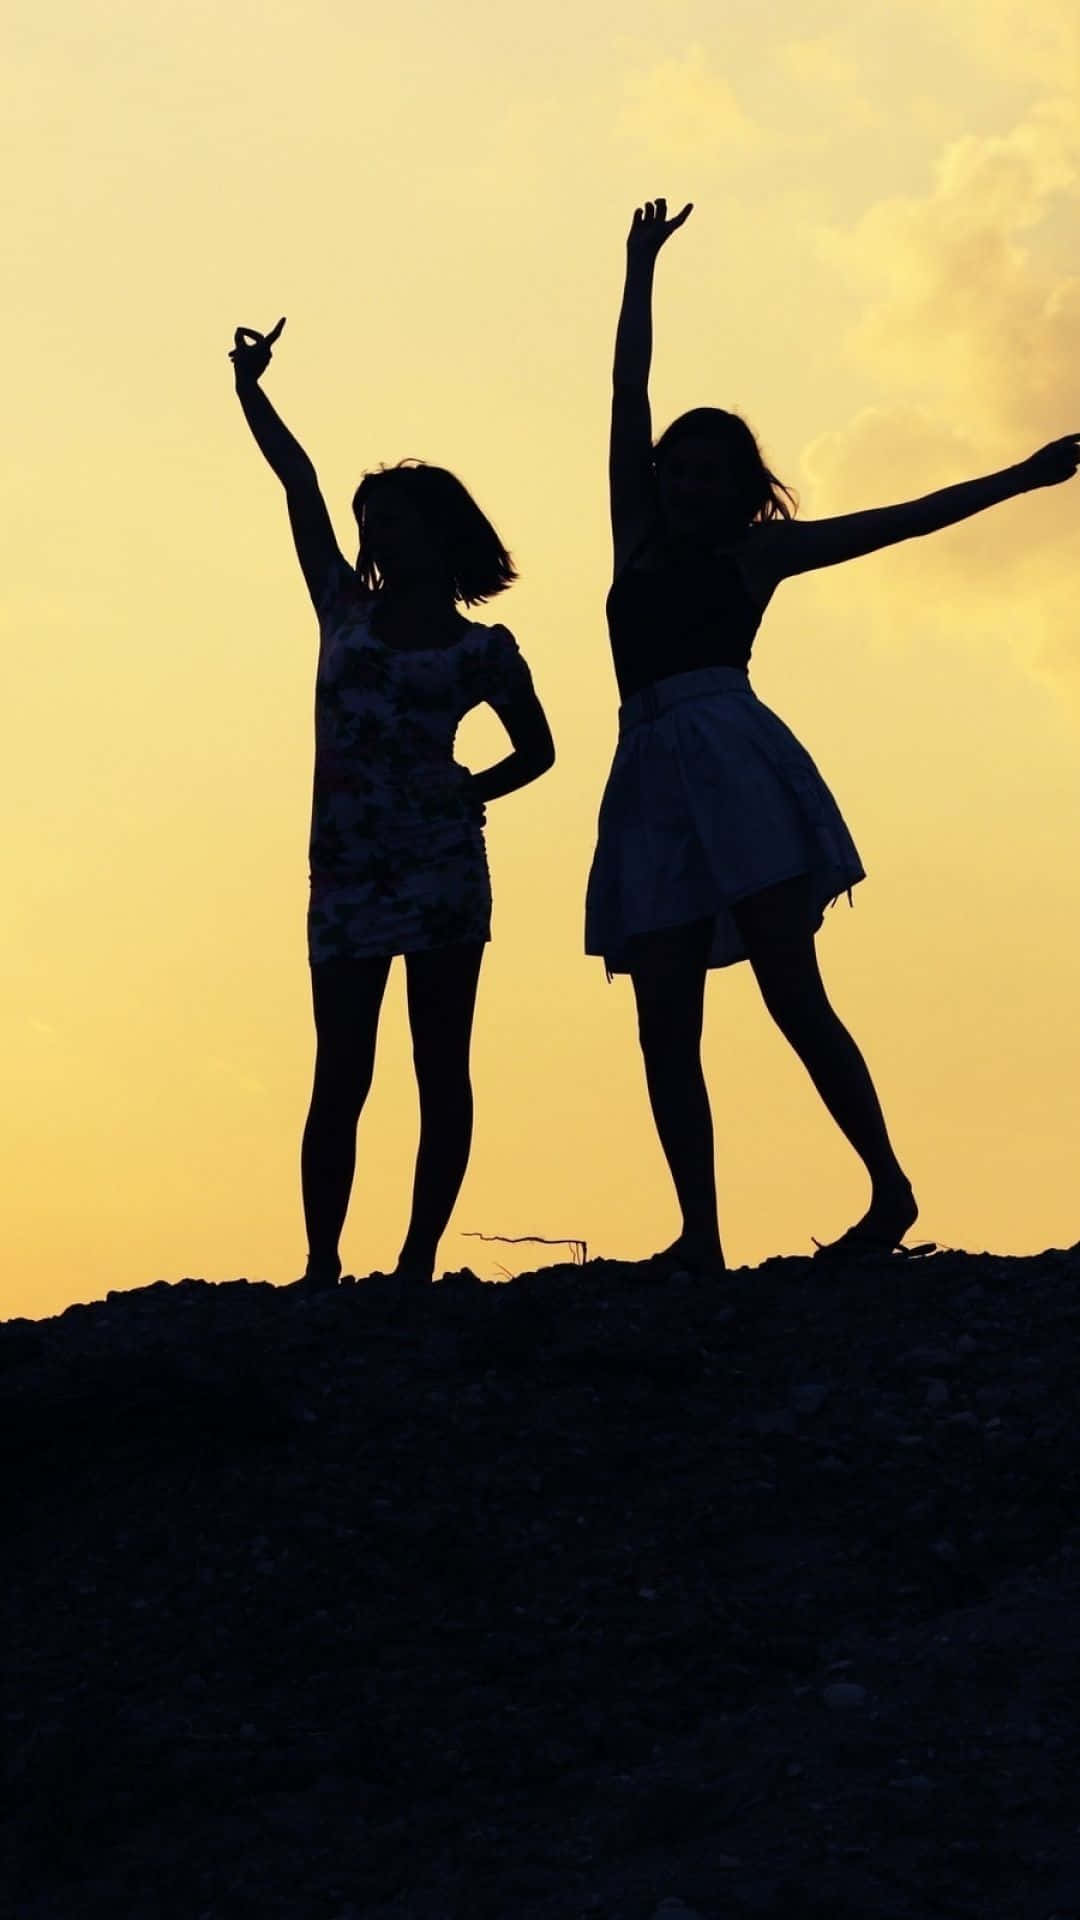 Friendship Women's Silhouette On Sunset Picture